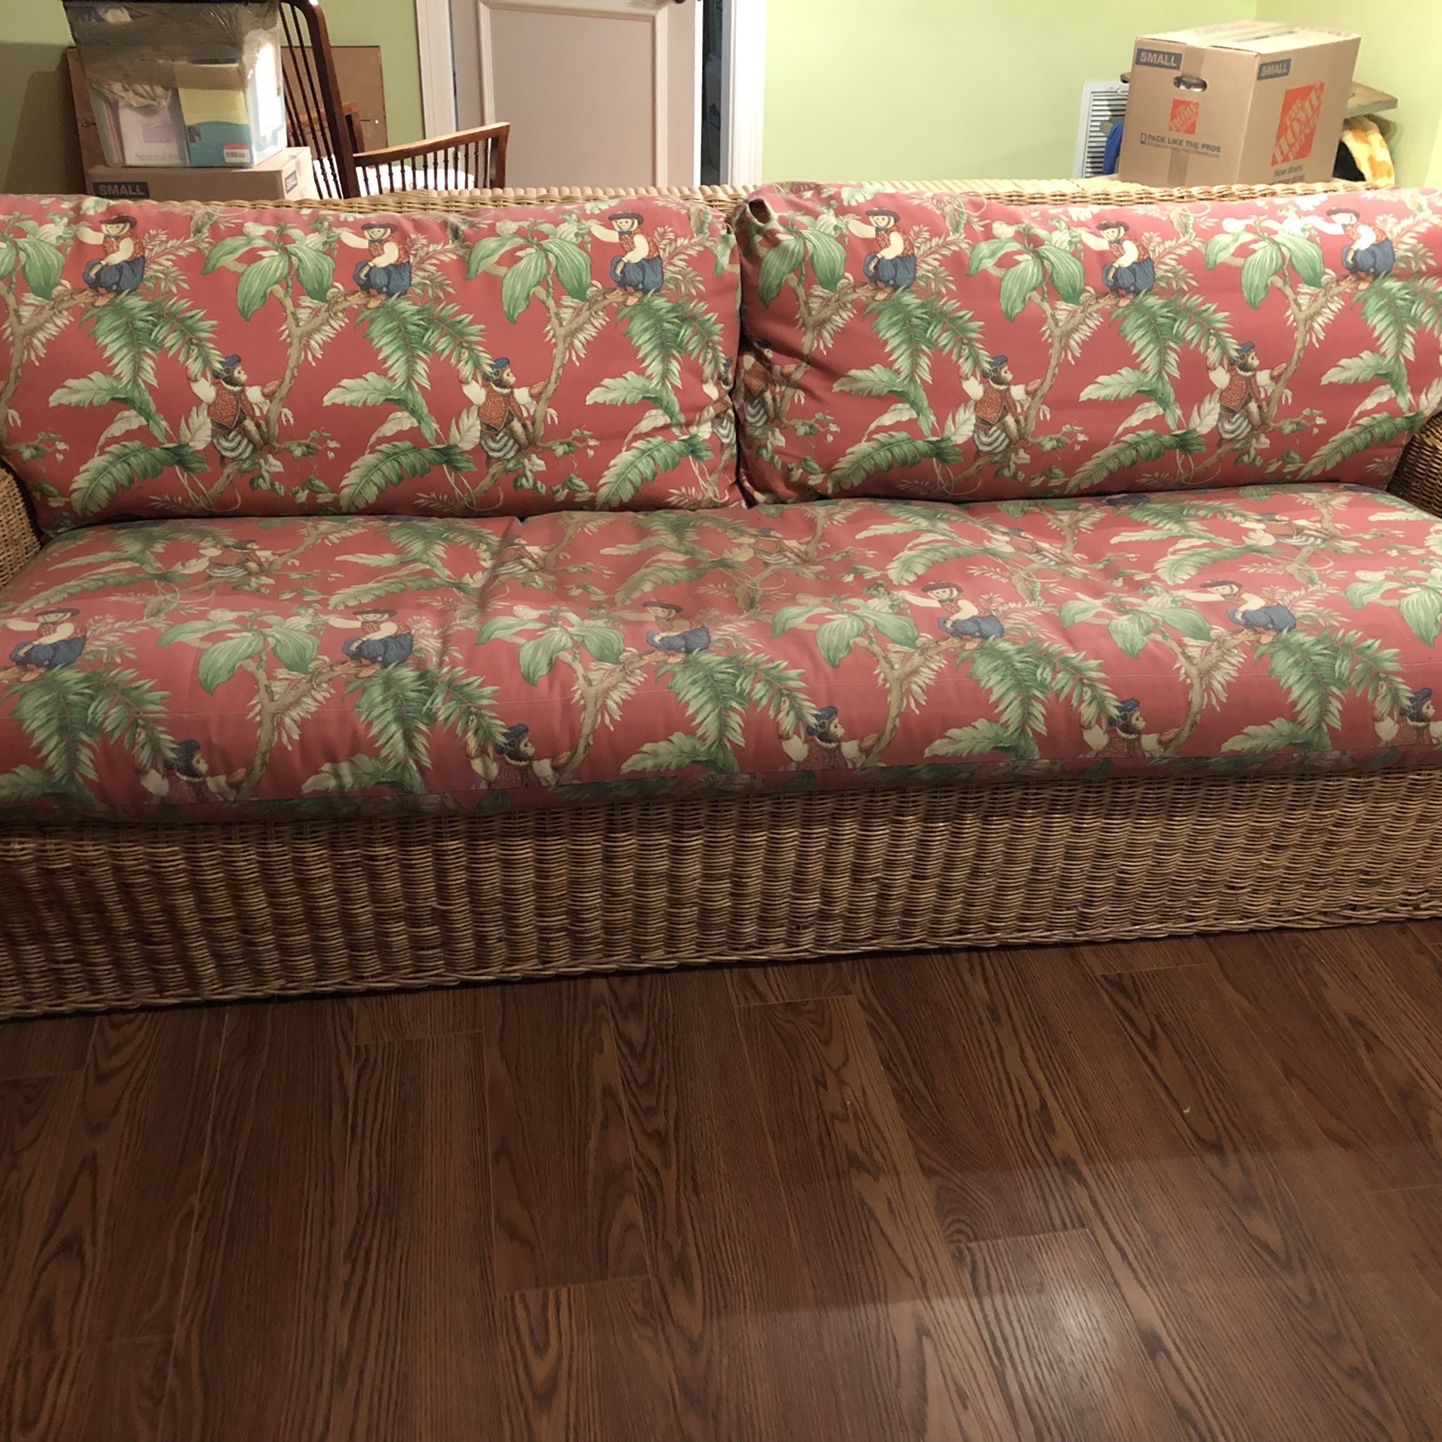 2 Rattan Couches With Red Monkey Fabric